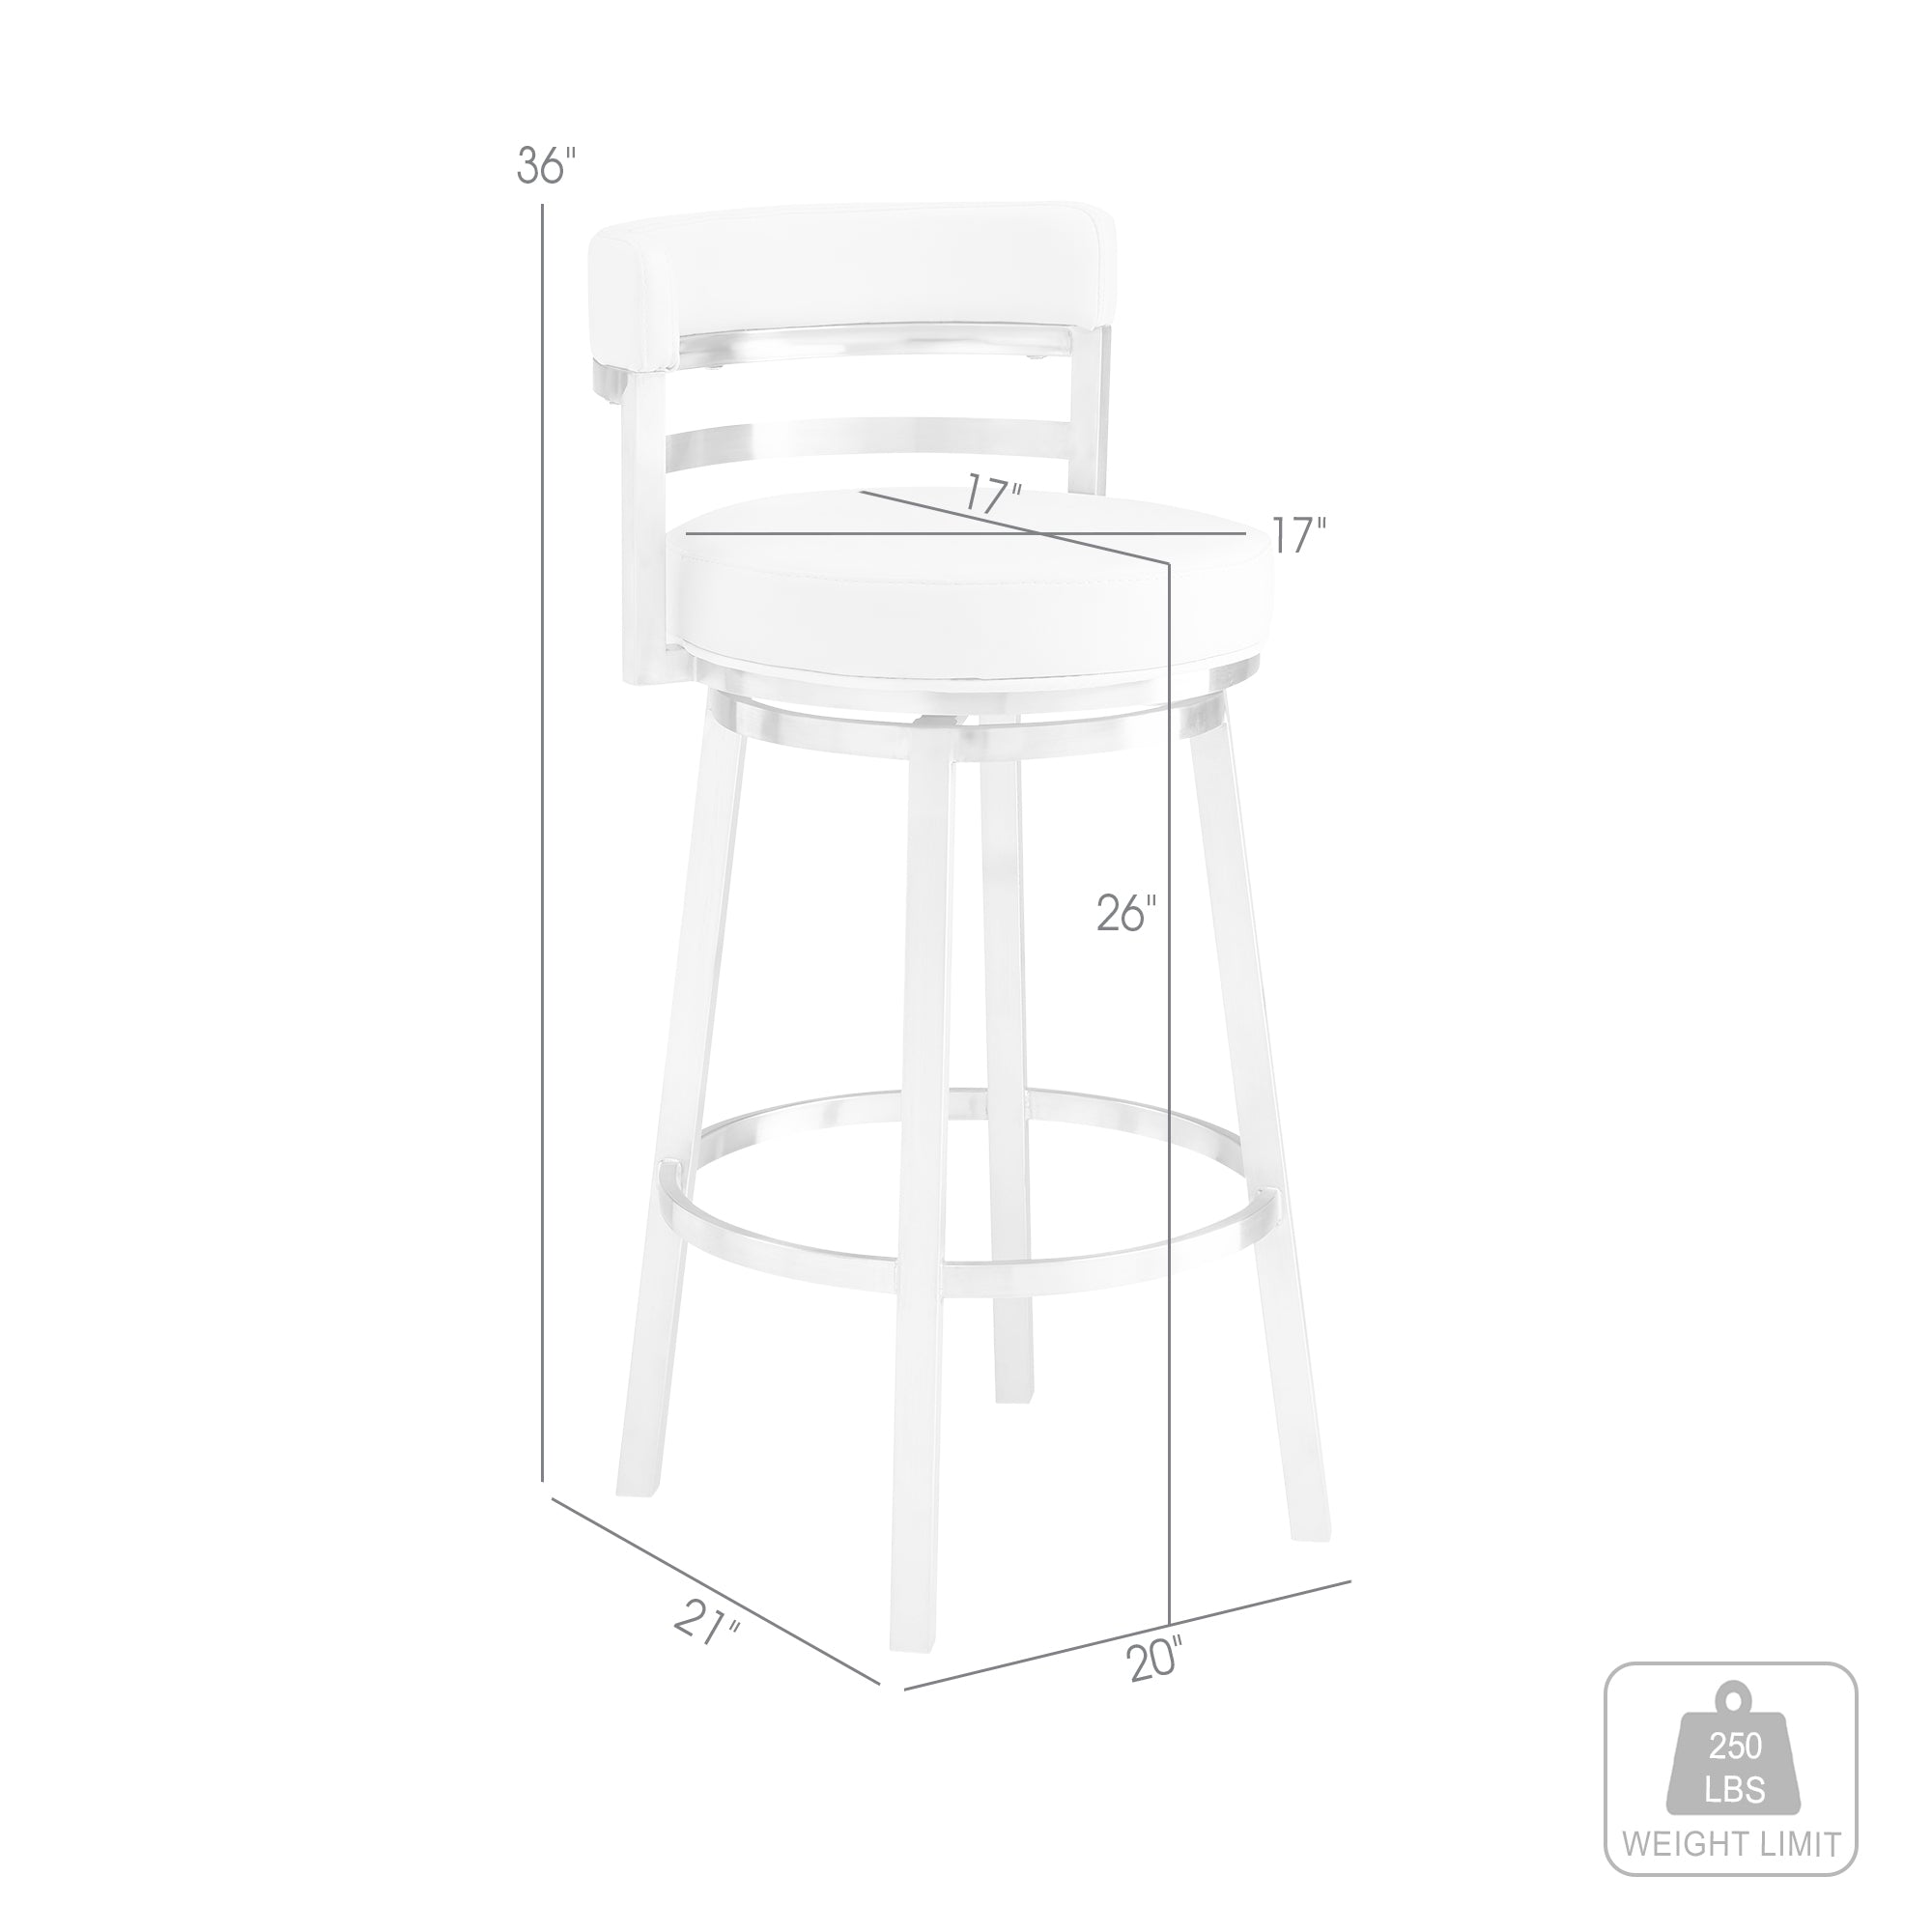 Armen Living - Titana Bar or Counter Stool in White Faux Leather and Metal - 840254335097